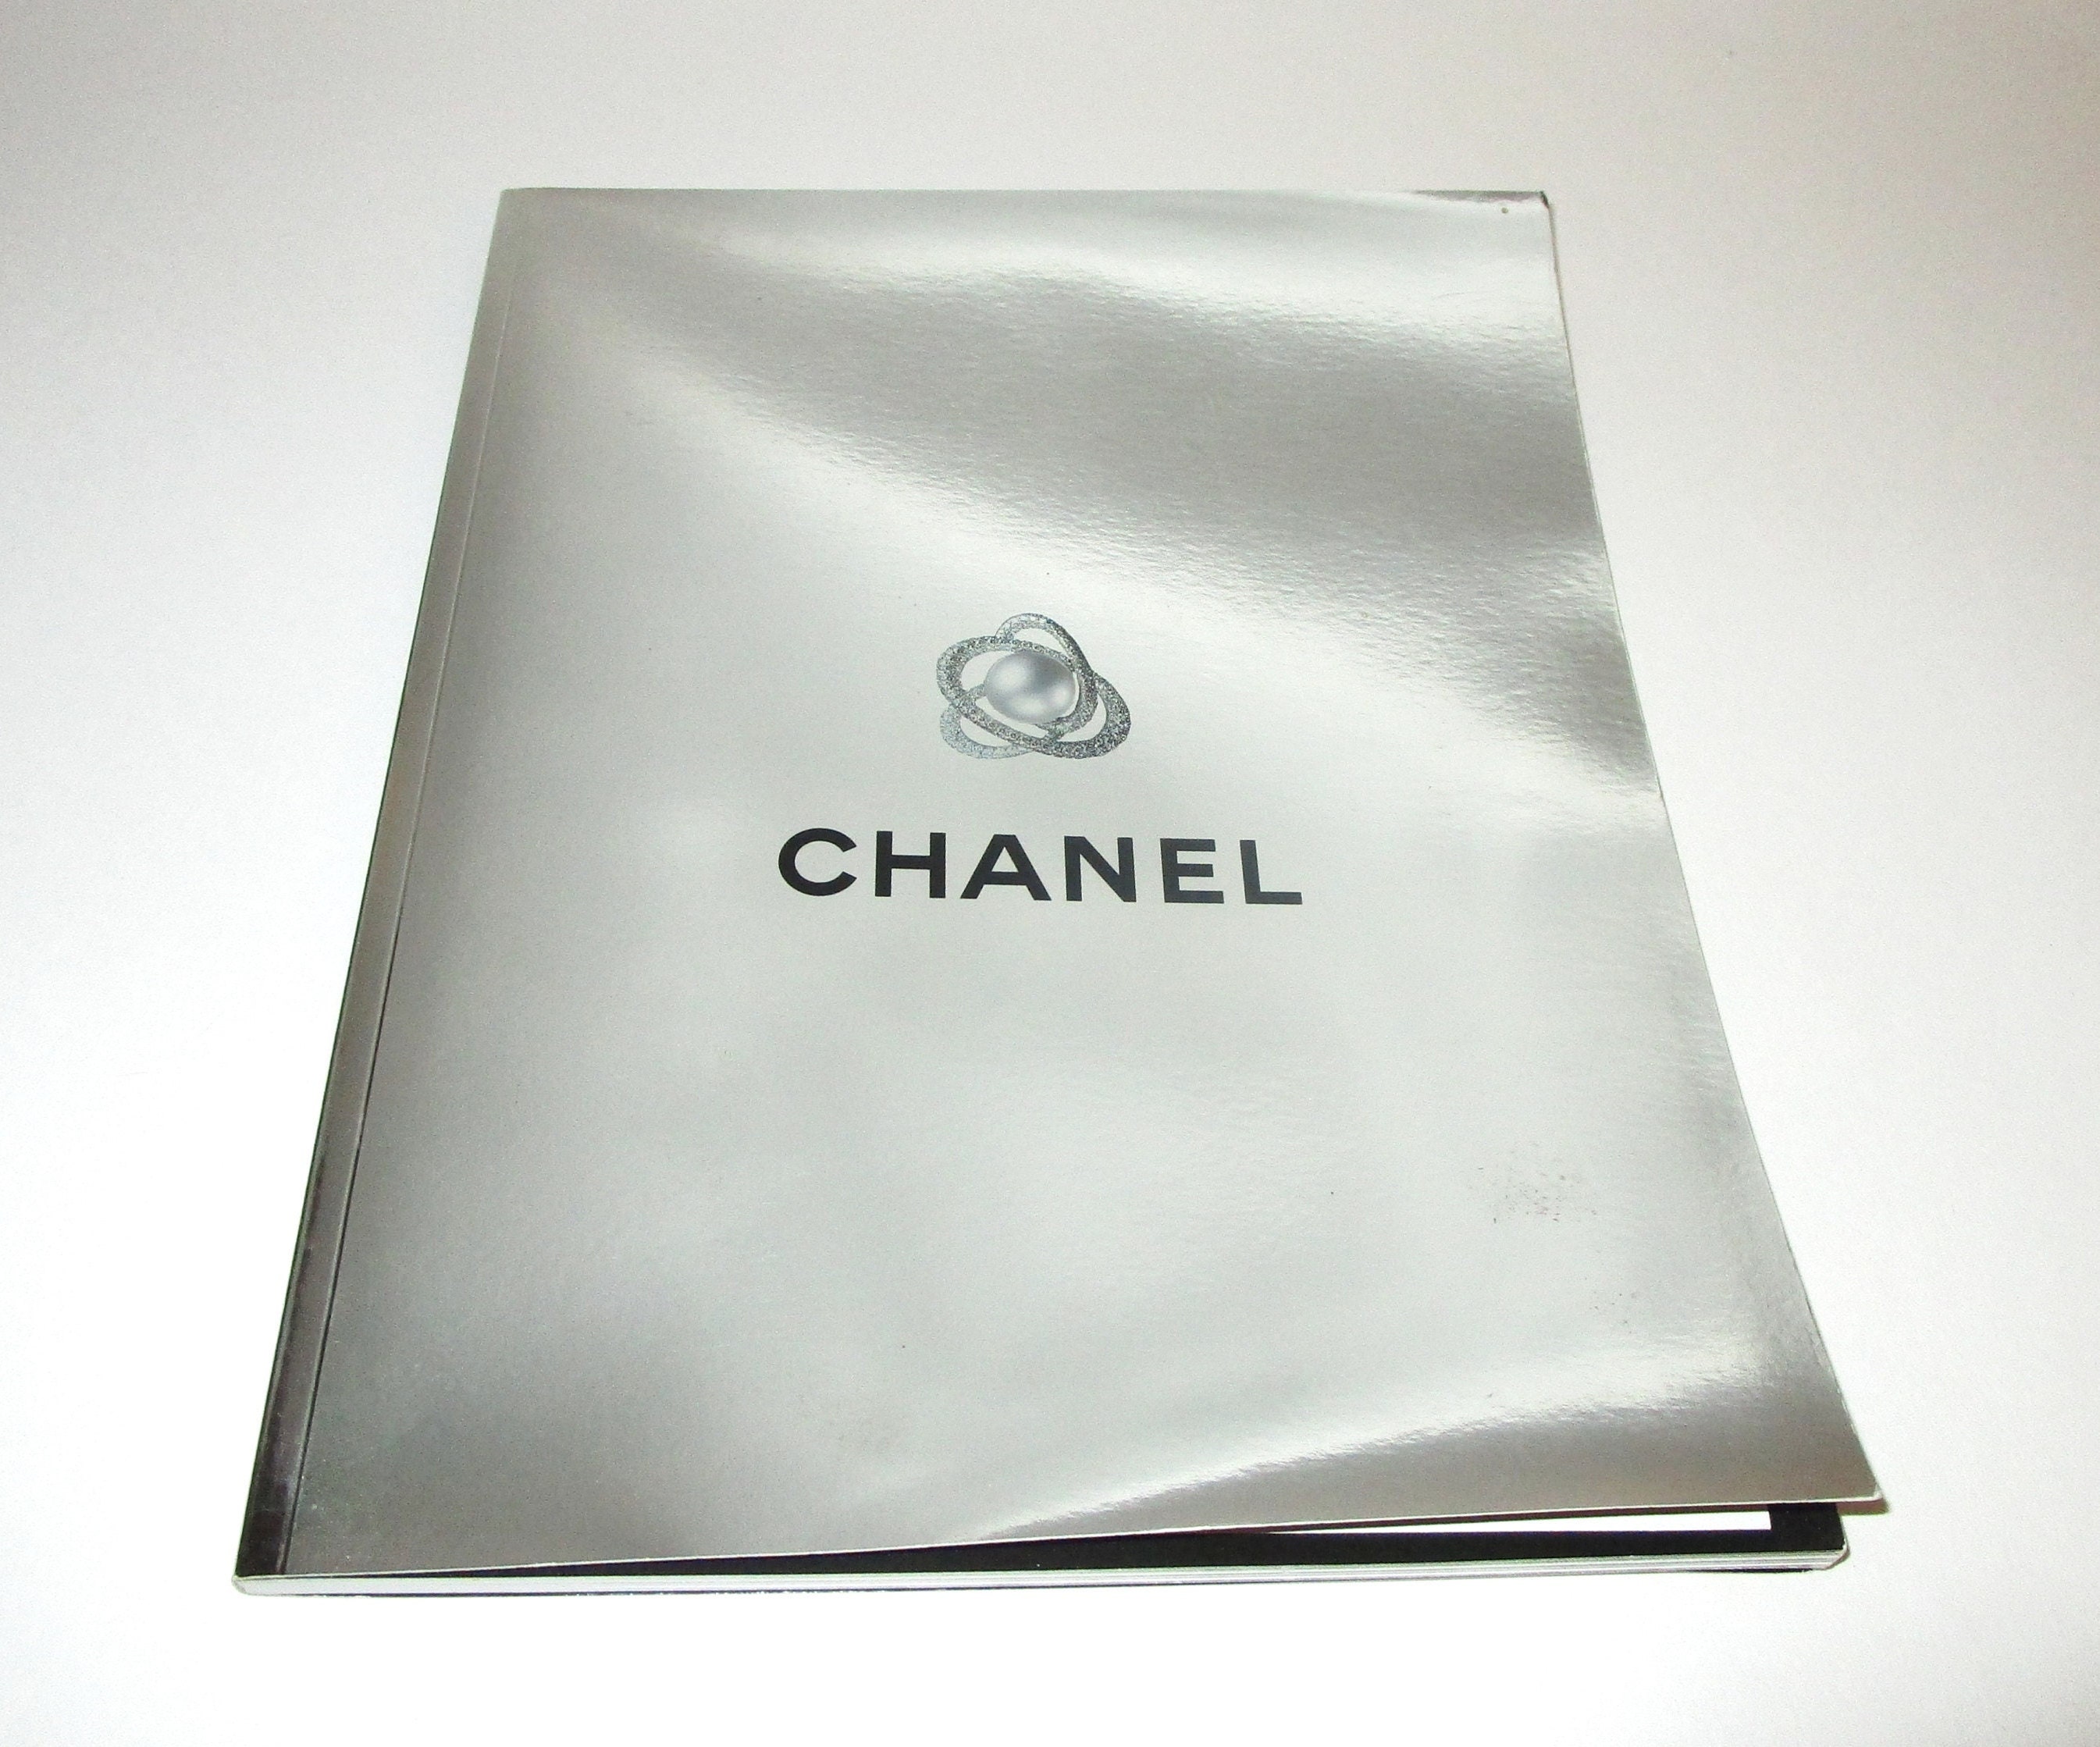 Chanel Vip Gift - 7 For Sale on 1stDibs